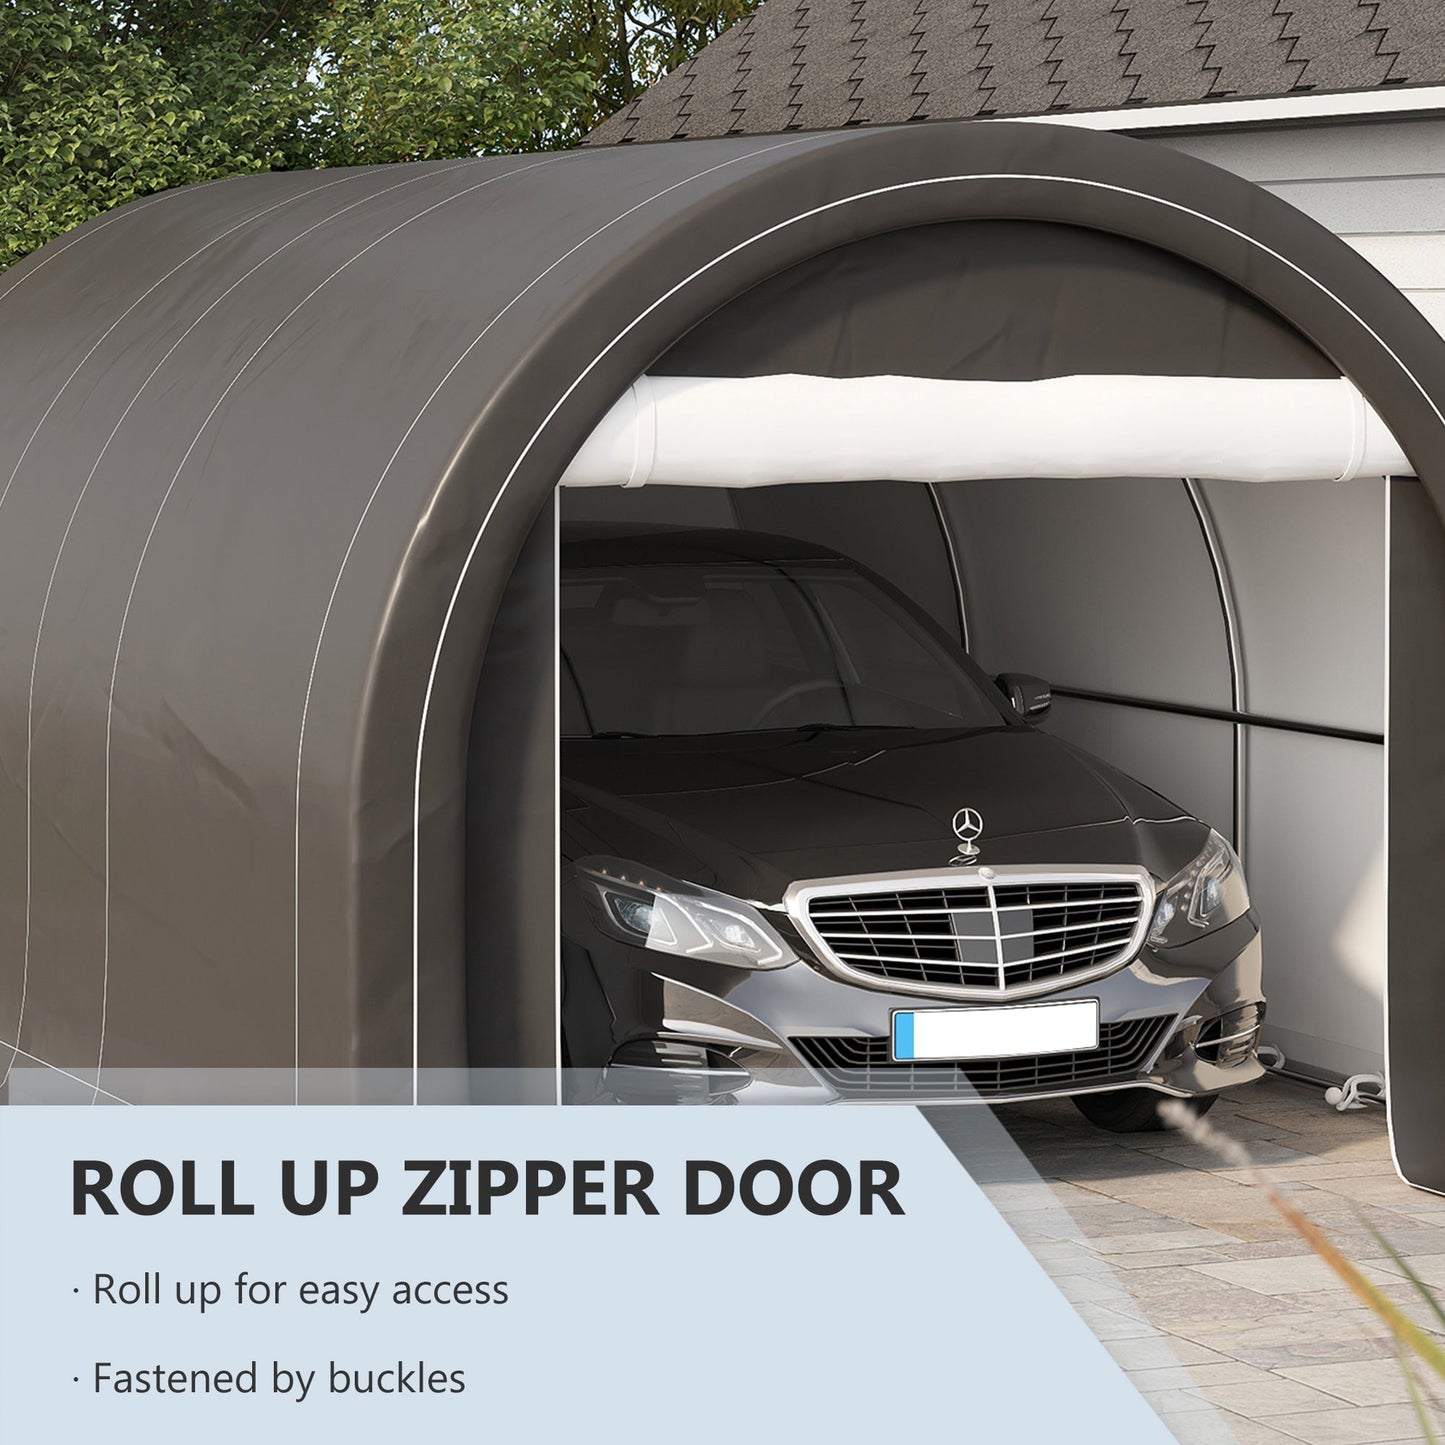 10' x 16' Heavy Duty Portable Carport Tent with Zippered Door, PE Cover for Car, Truck, Boat, Motorcycle, Bike, Grey at Gallery Canada